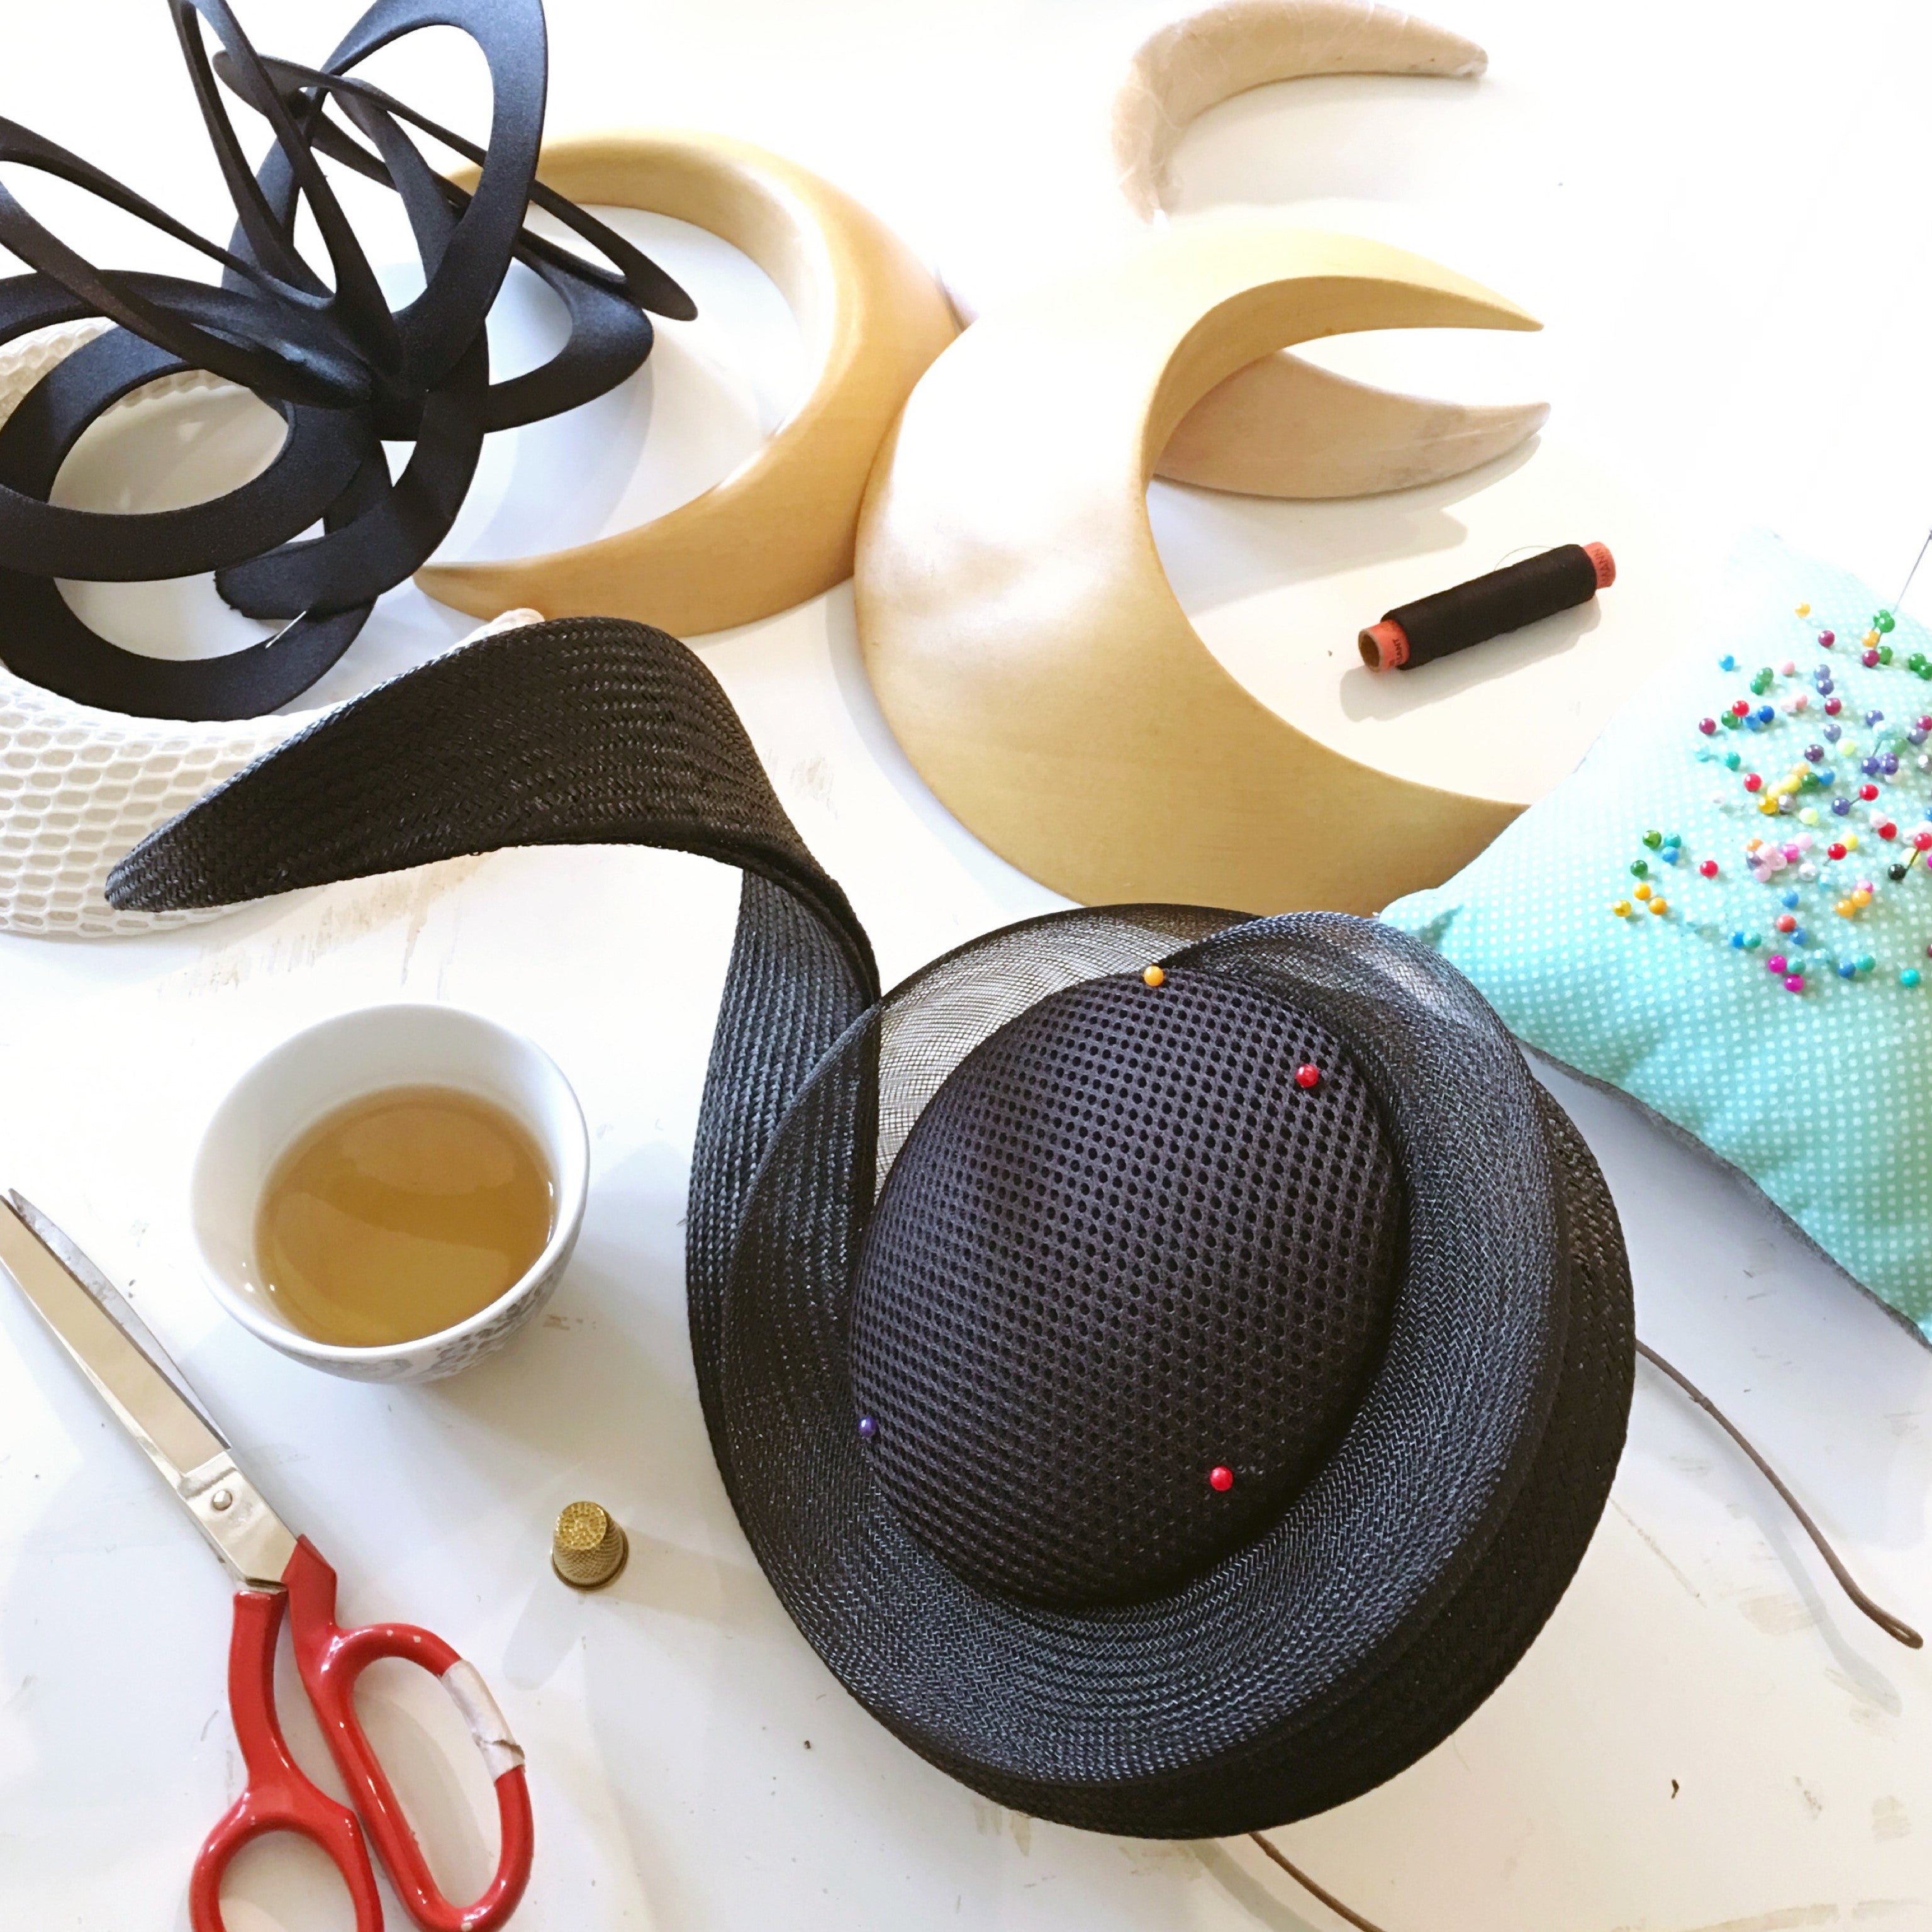 Percher hat millinery tools and hat on a flat lat along with a cup of tea